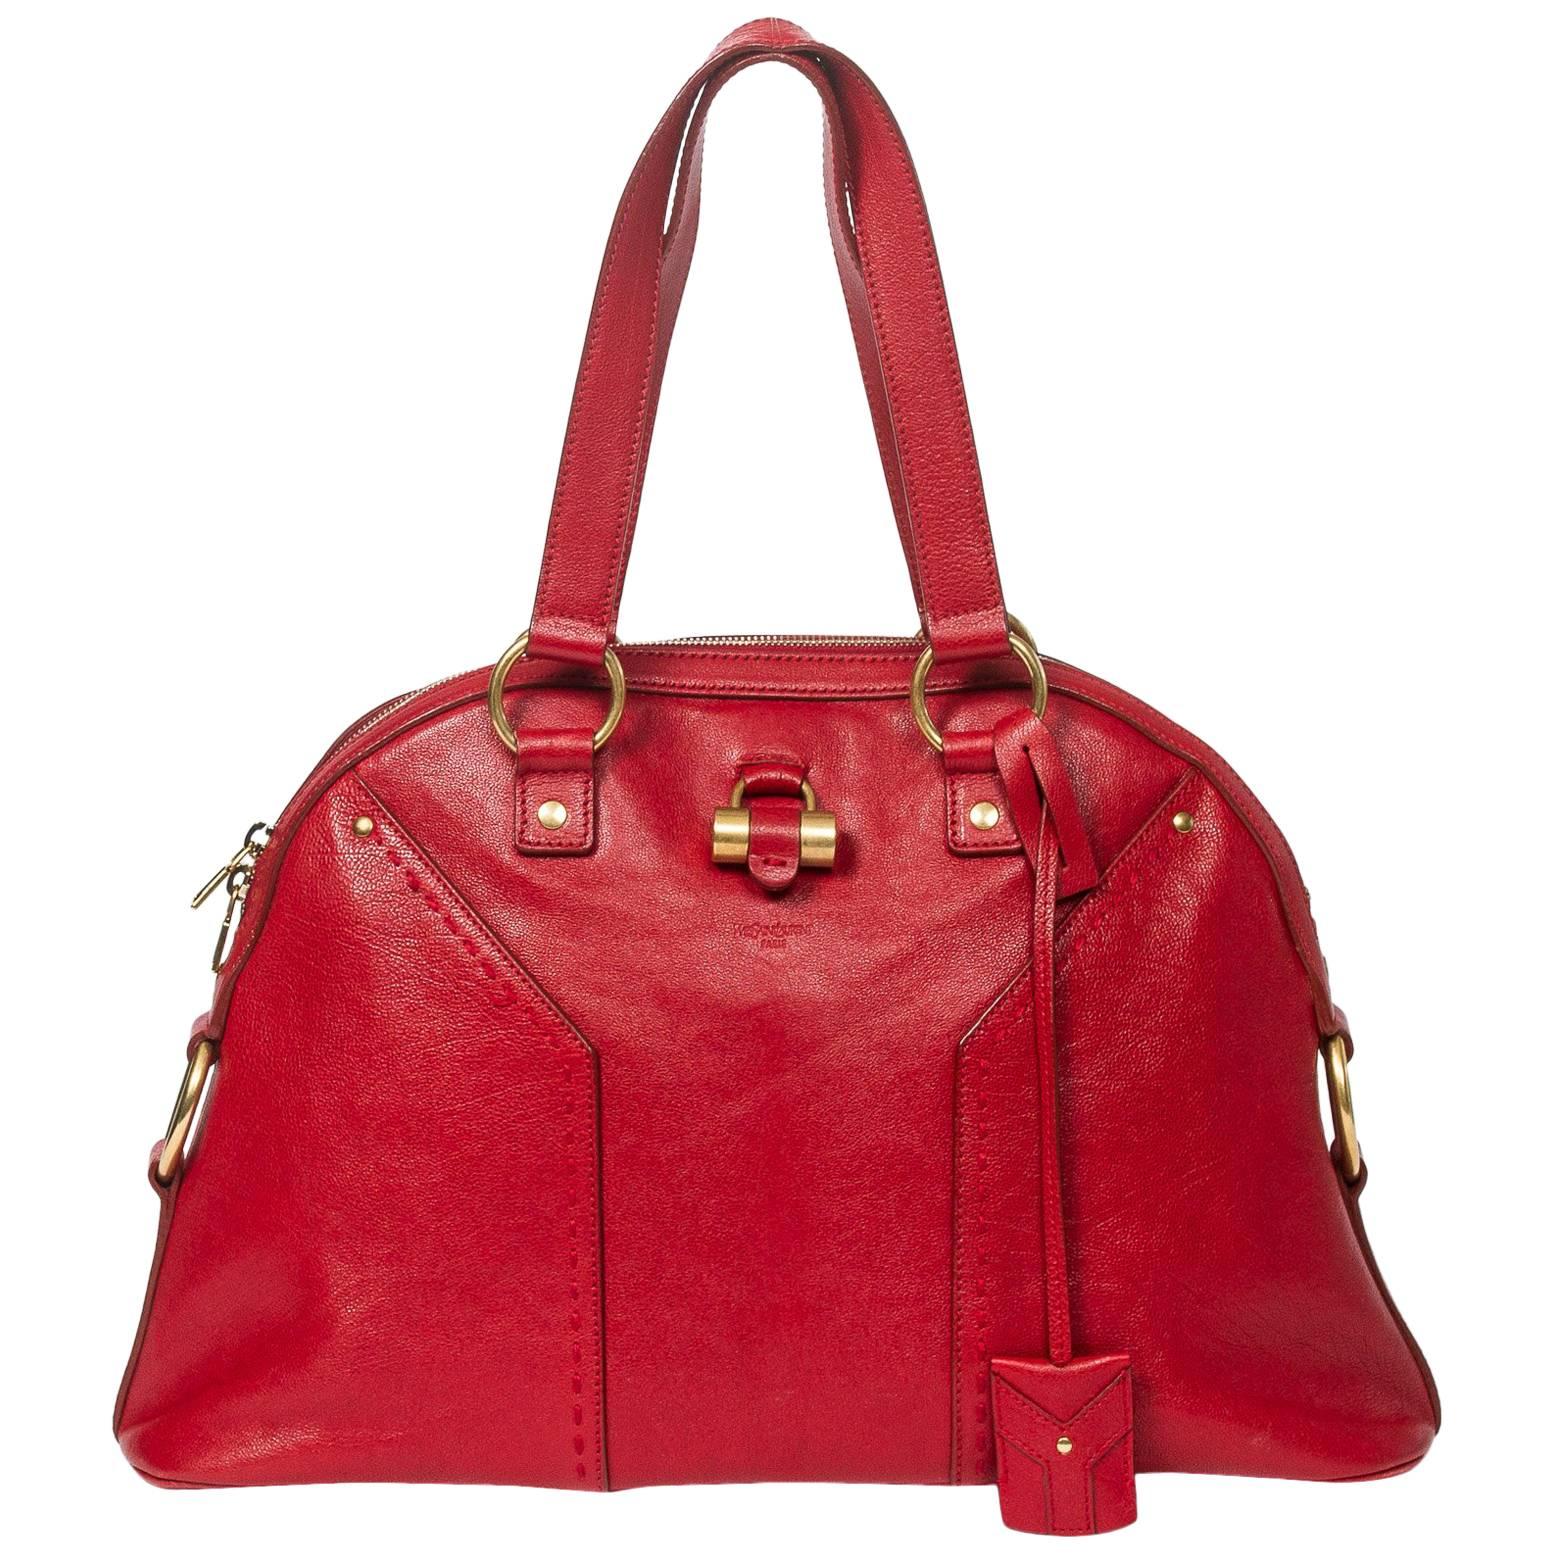 Yves Saint Laurent Muse 1 in Red calf leather For Sale